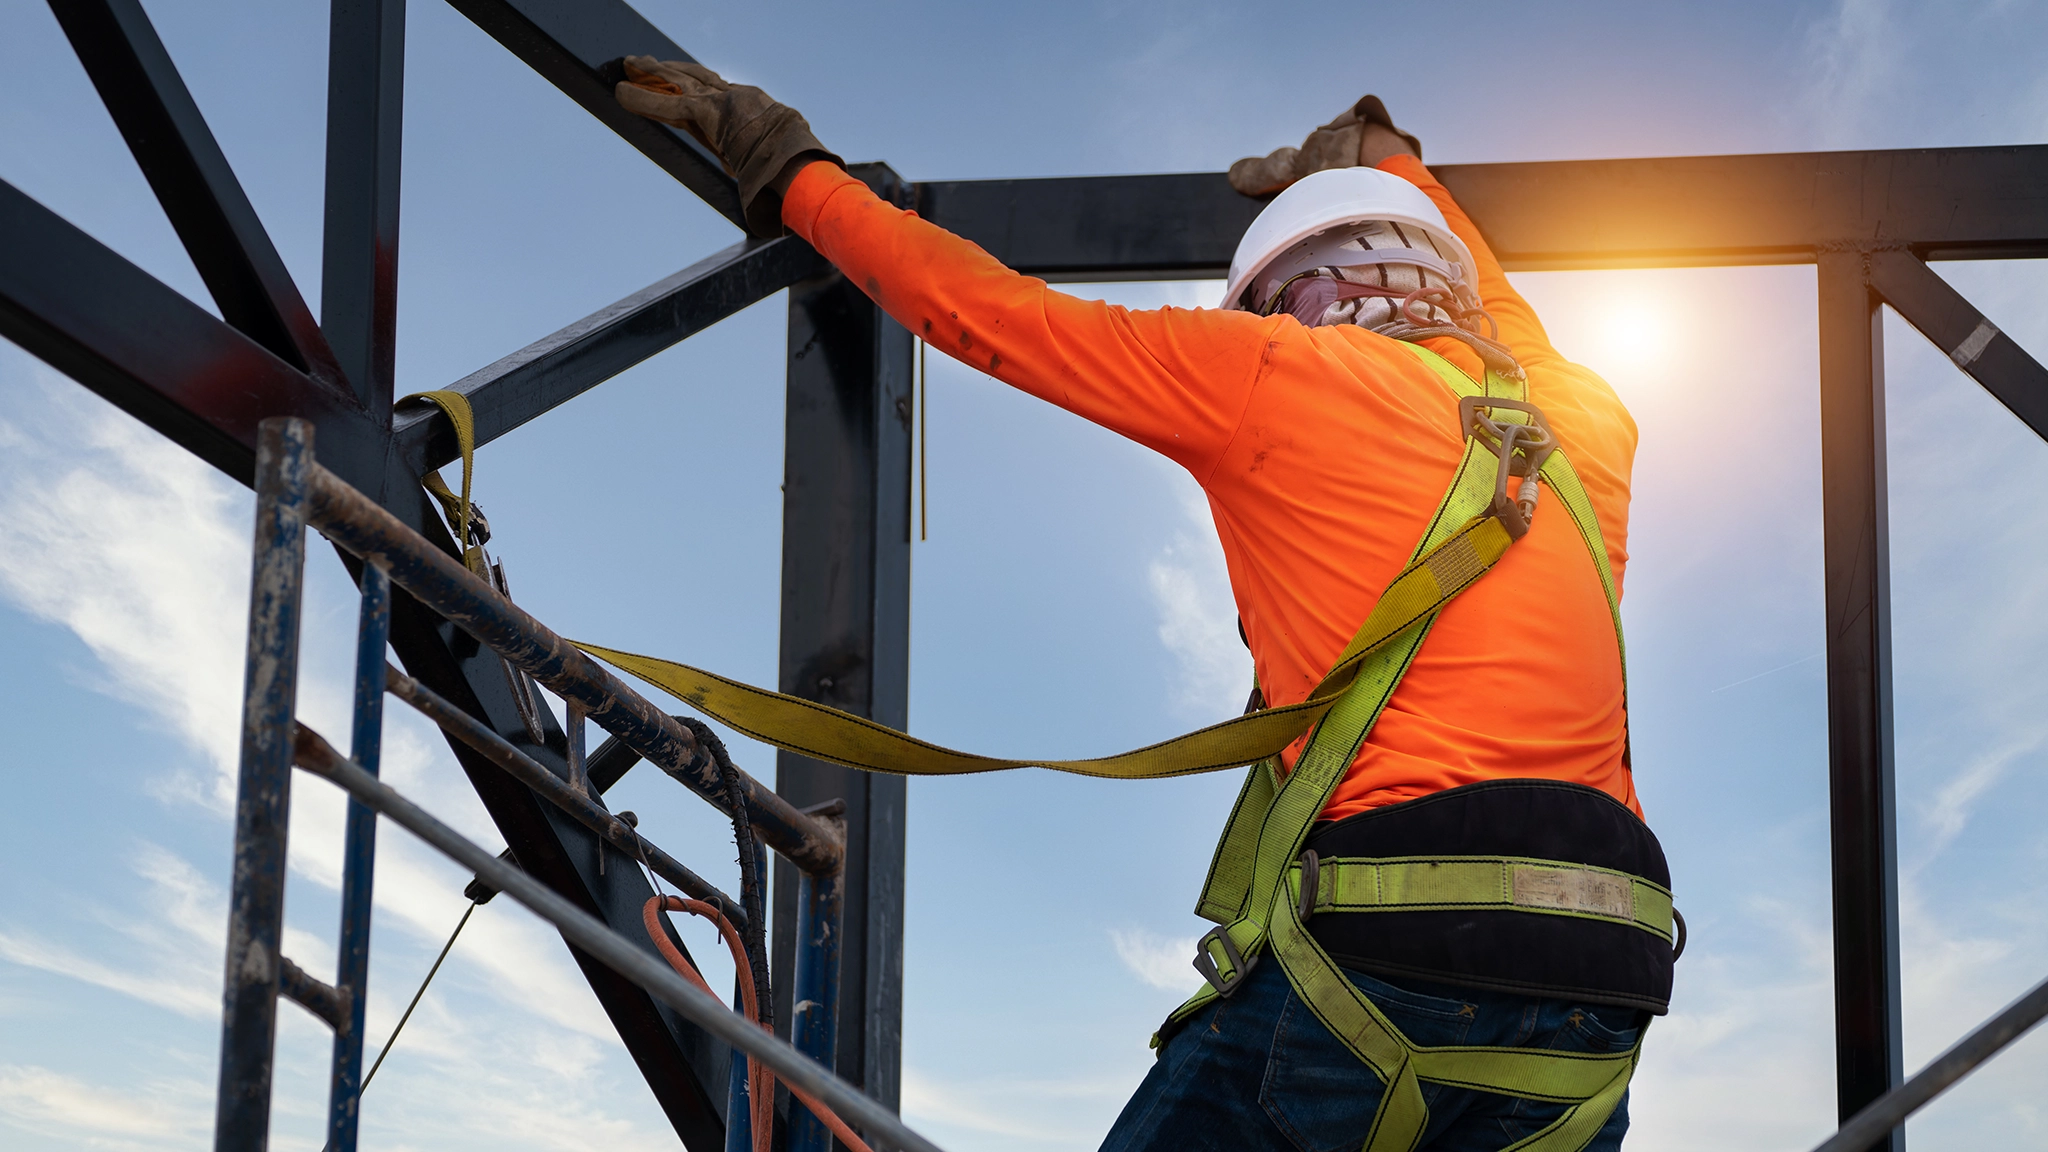 Choosing the Right Equipment for Work Safety